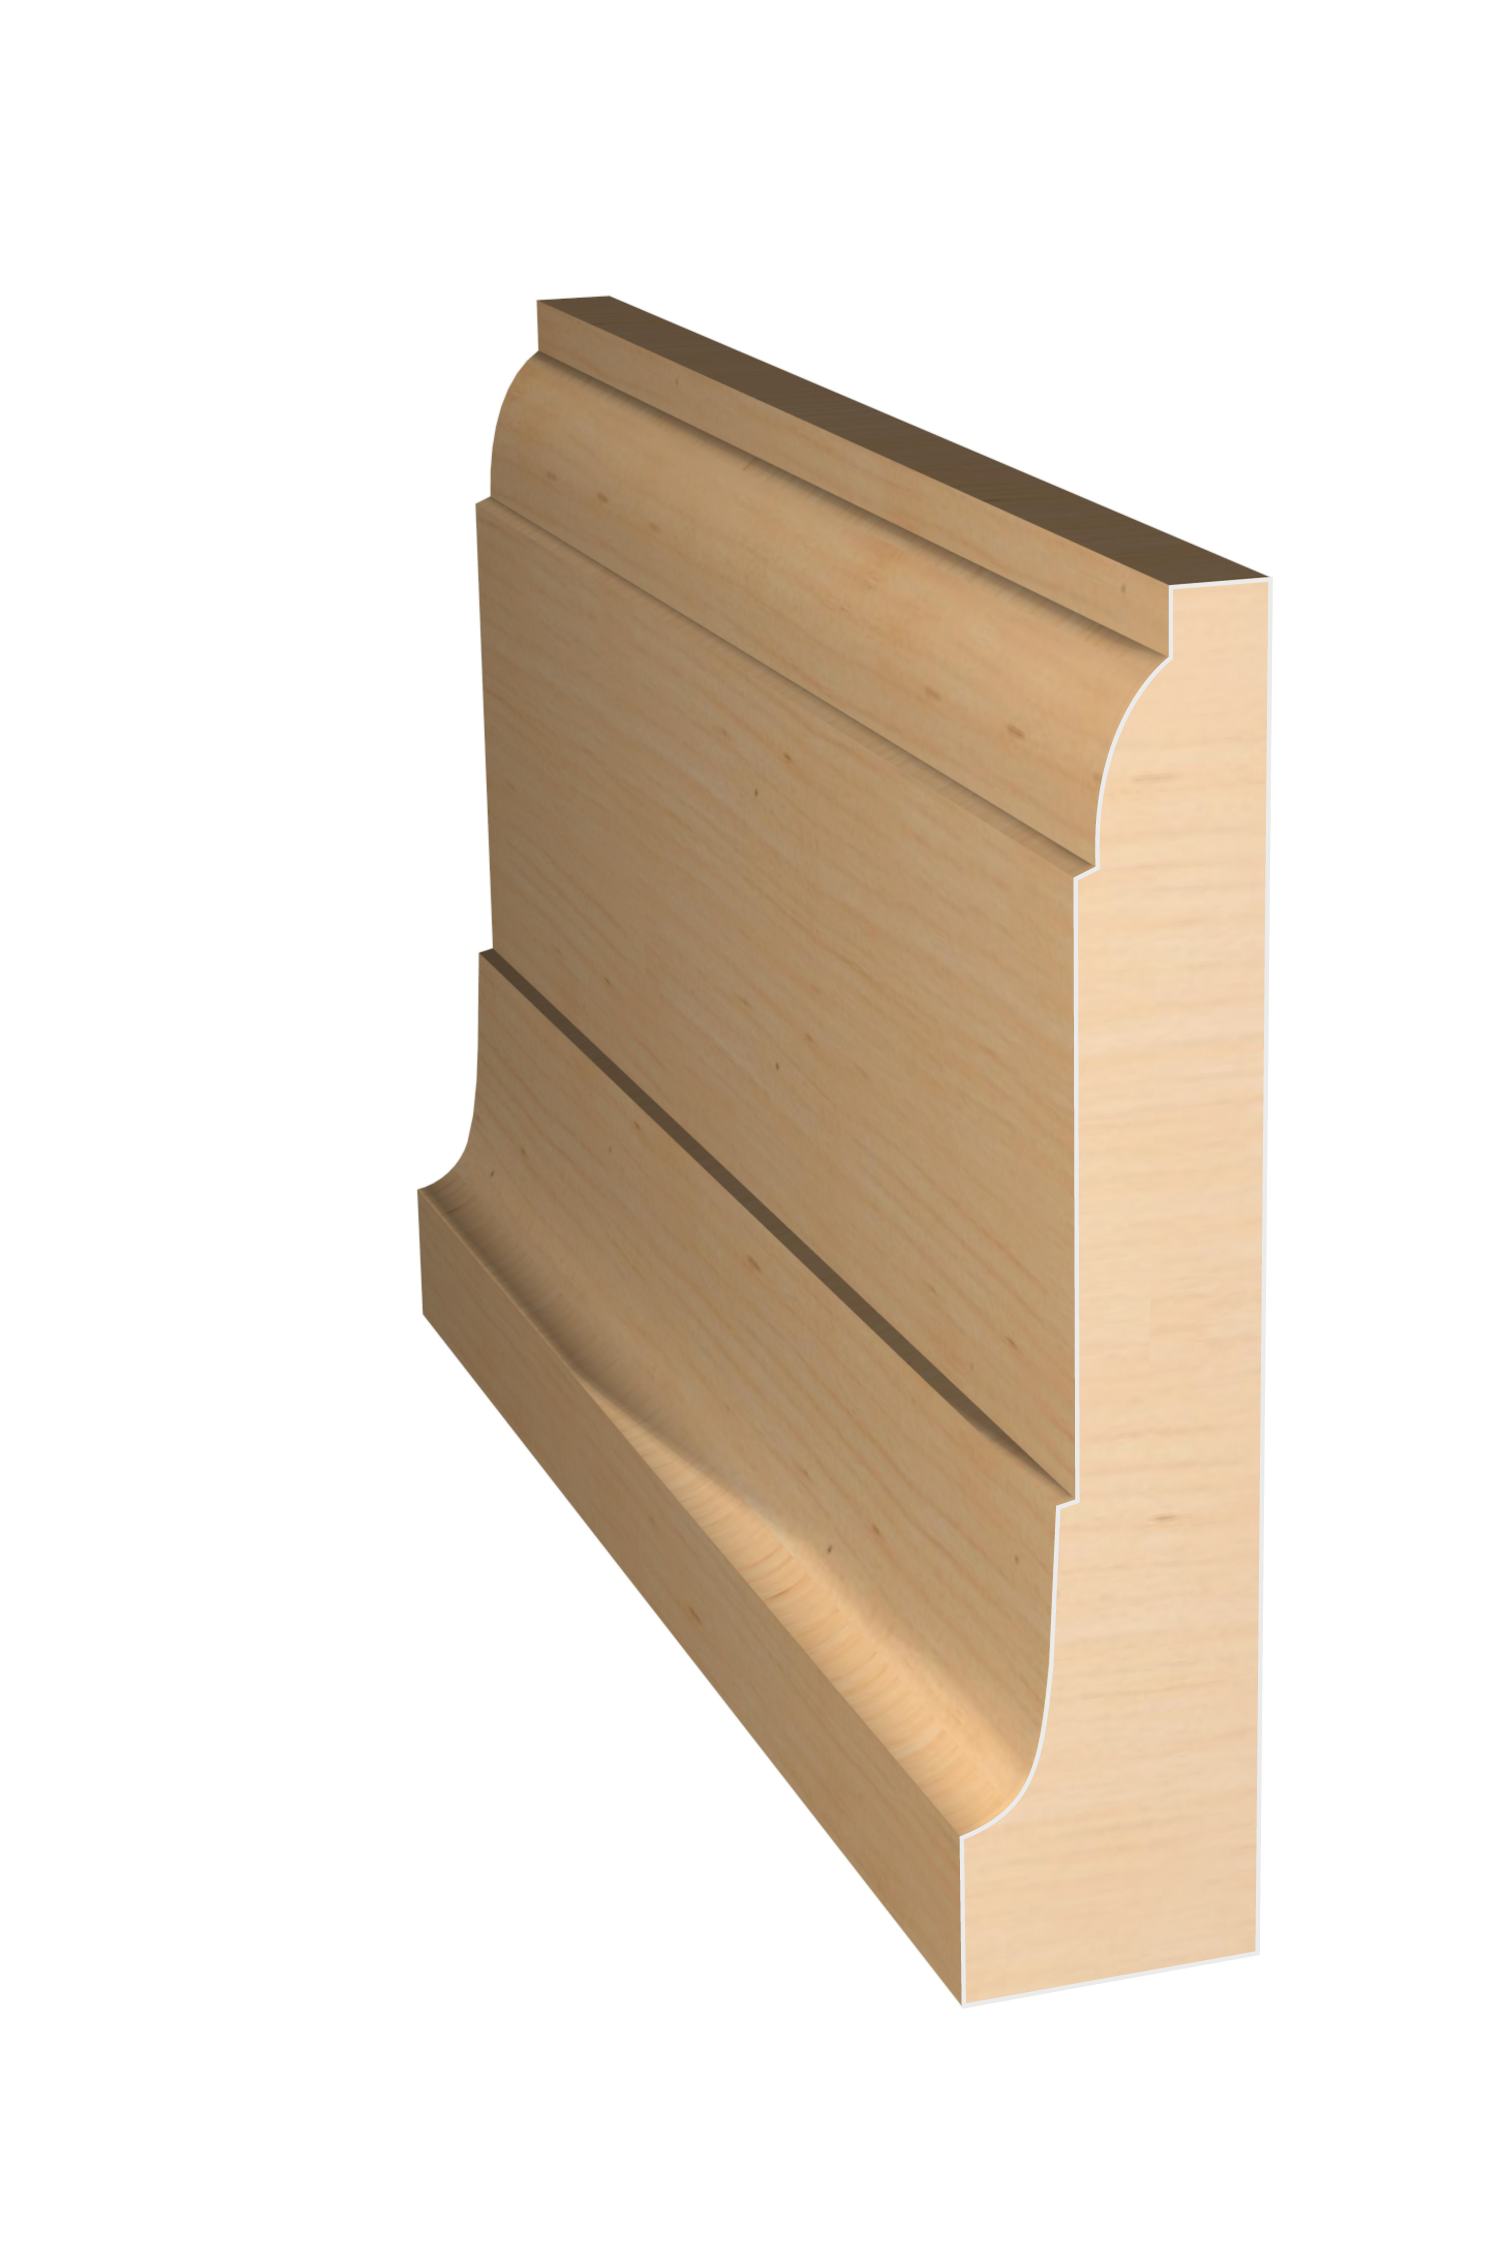 Three dimensional rendering of custom casing wood molding CAPL3782 made by Public Lumber Company in Detroit.